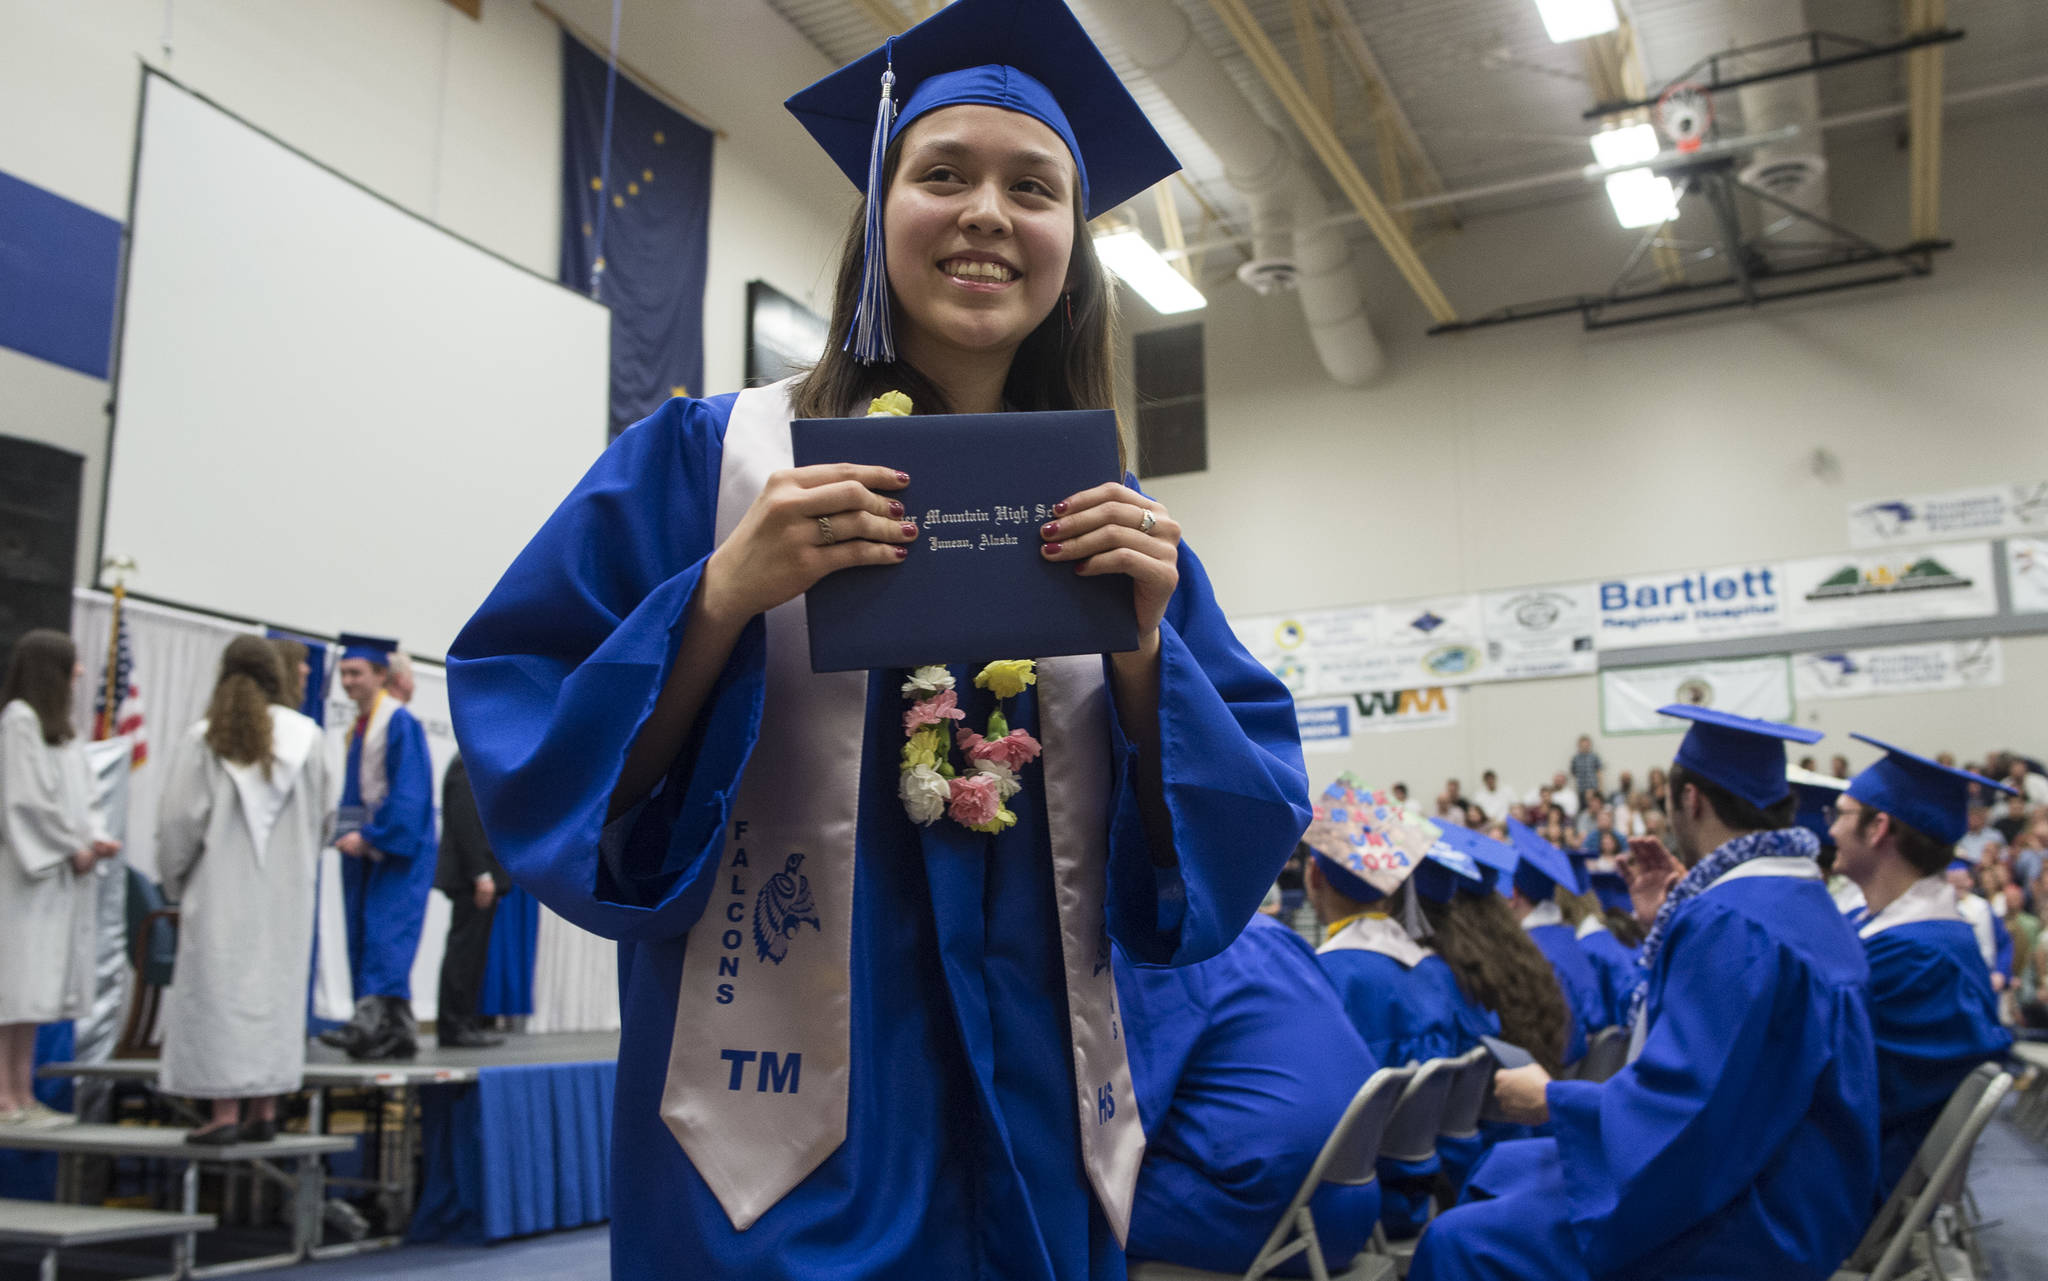 Adindean Franklin displays her diploma for her family after walking off the stage during the Thunder Mountain High School graduation on Sunday, May 26, 2019. The Juneau School District board is considering temporarily reducing the number of credits needed to graduate from 23 to 22.5, which is still 1.5 credits more than the state requires for high school graduation. The change will help students who are lagging in credits due to pandemic-related school closures and distance learning graduate on time. (Michael Penn/Juneau Empire File)